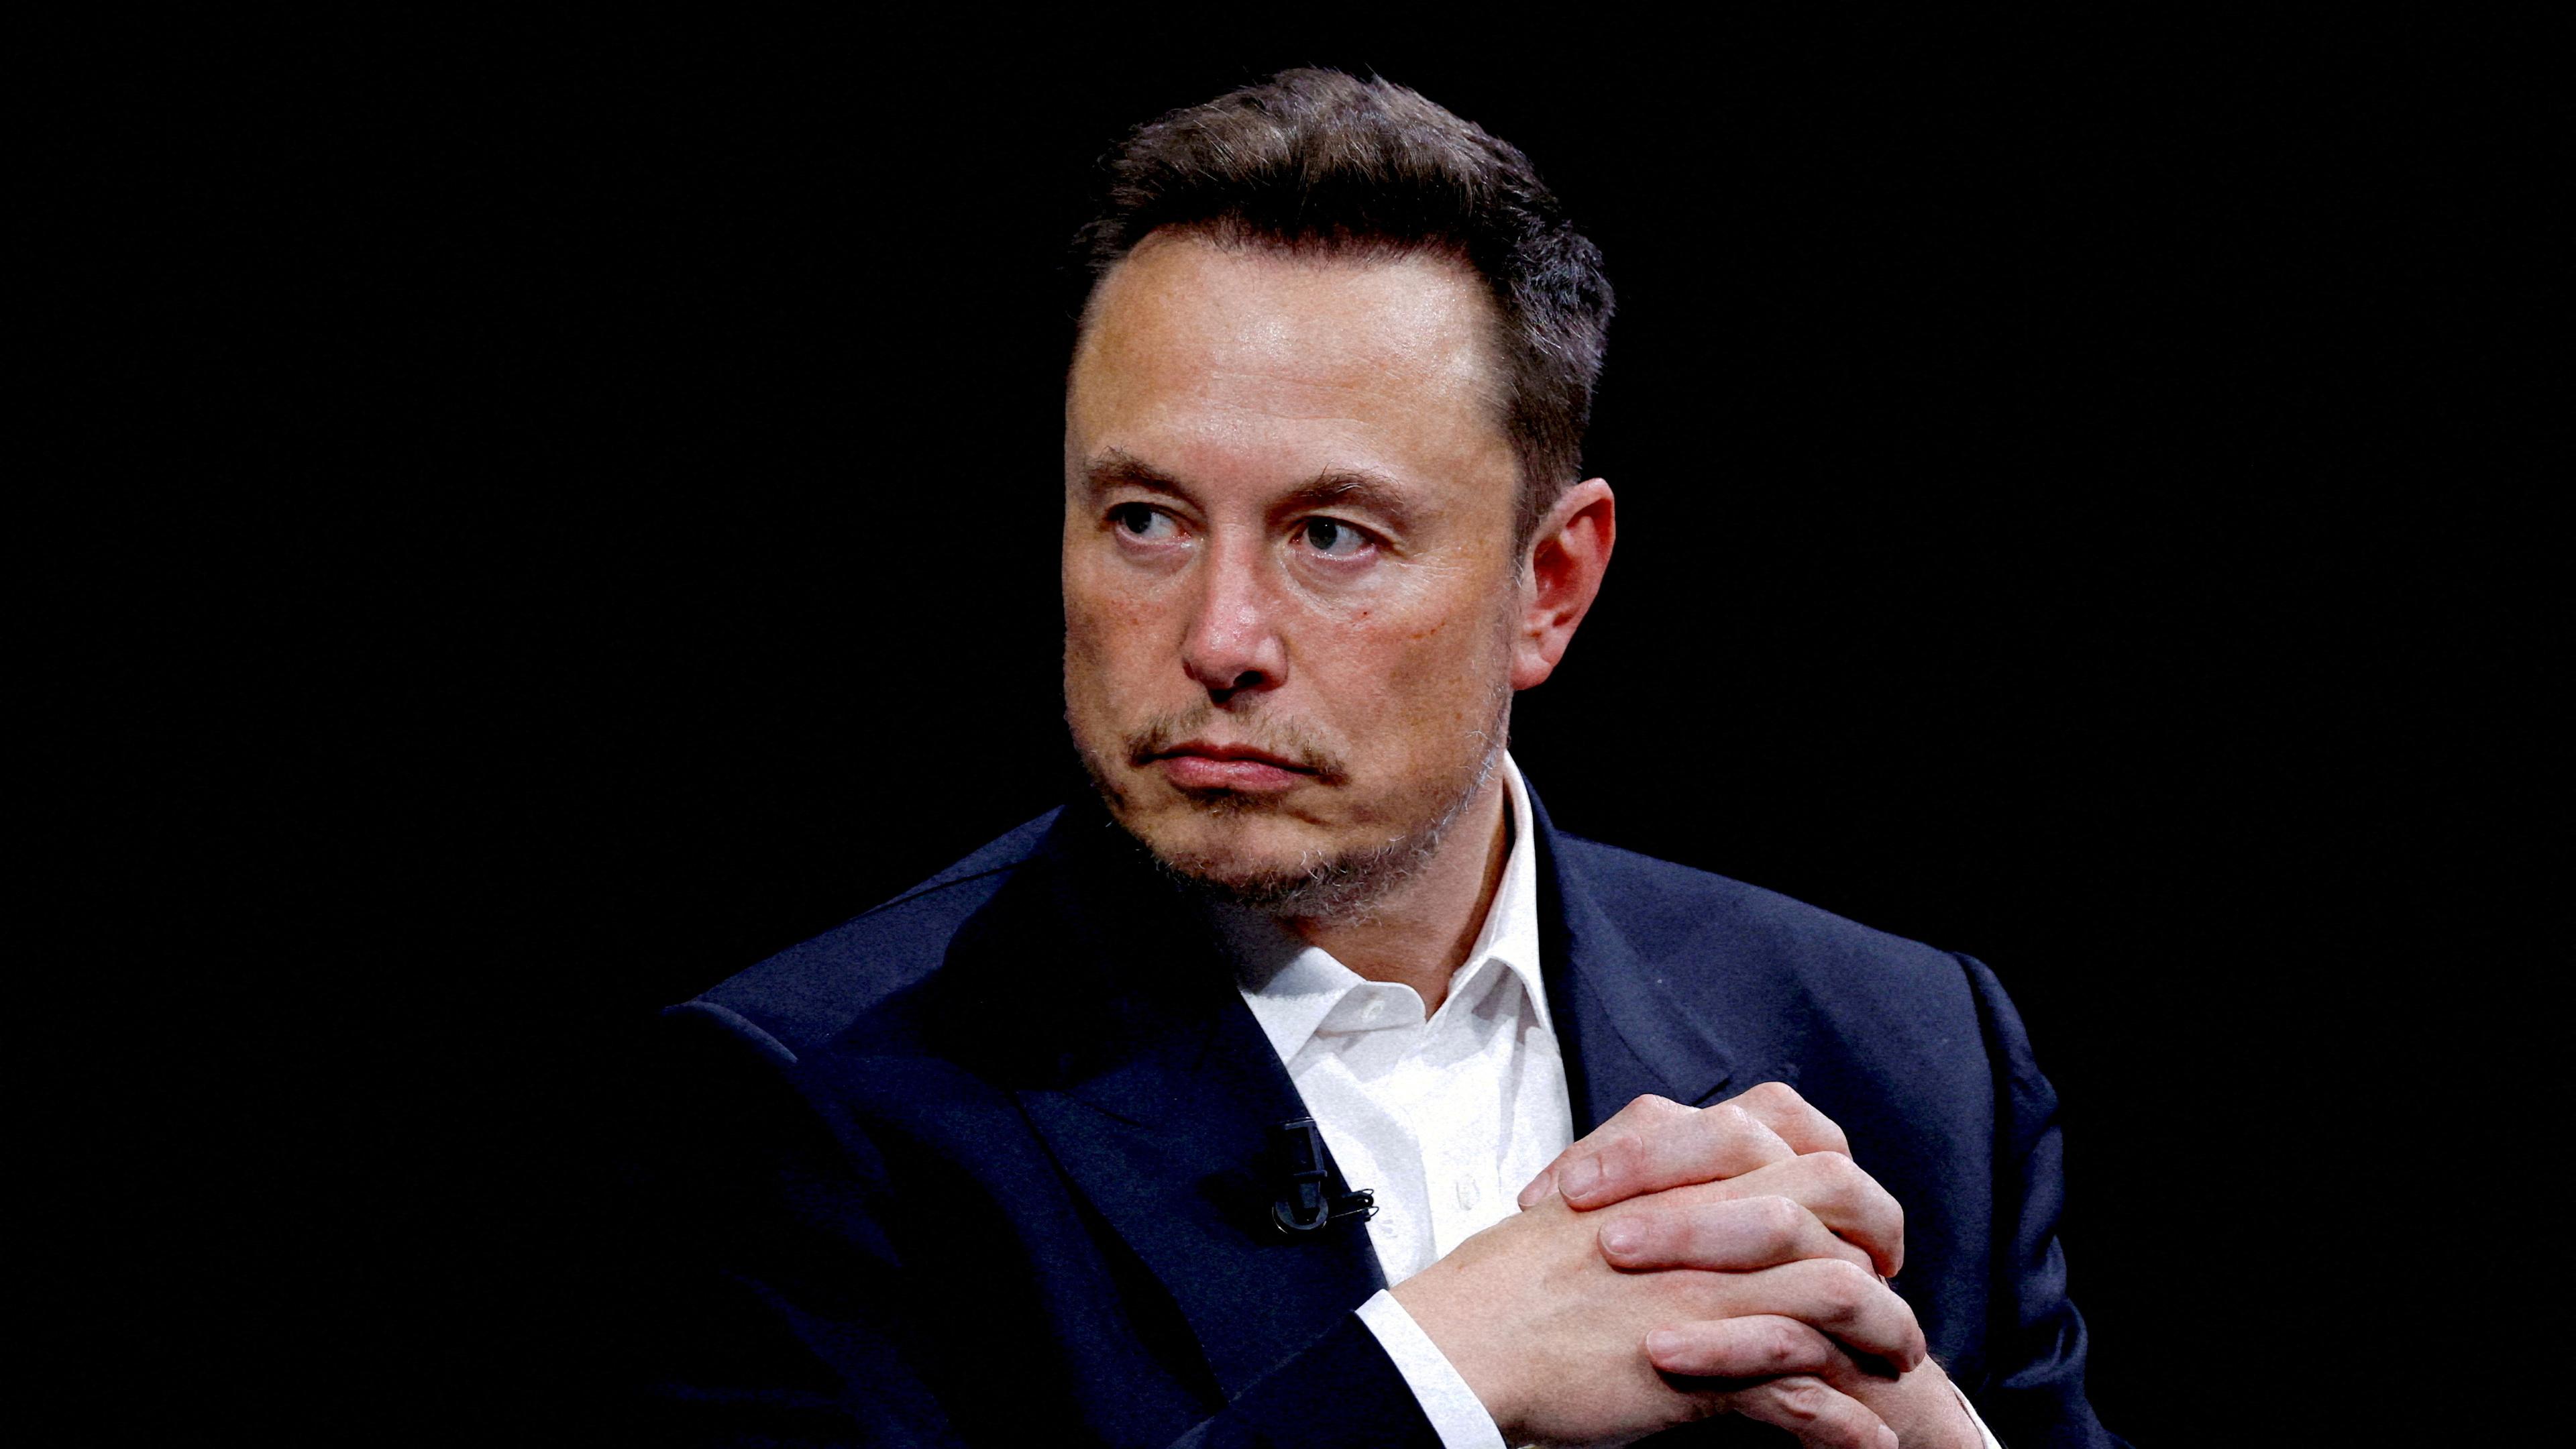 Elon Musk, CEO of SpaceX and Tesla and owner of X, formerly known as Twitter, attends the Viva Technology conference dedicated to innovation and startups at the Porte de Versailles exhibition centre in Paris, France, June 16, 2023.